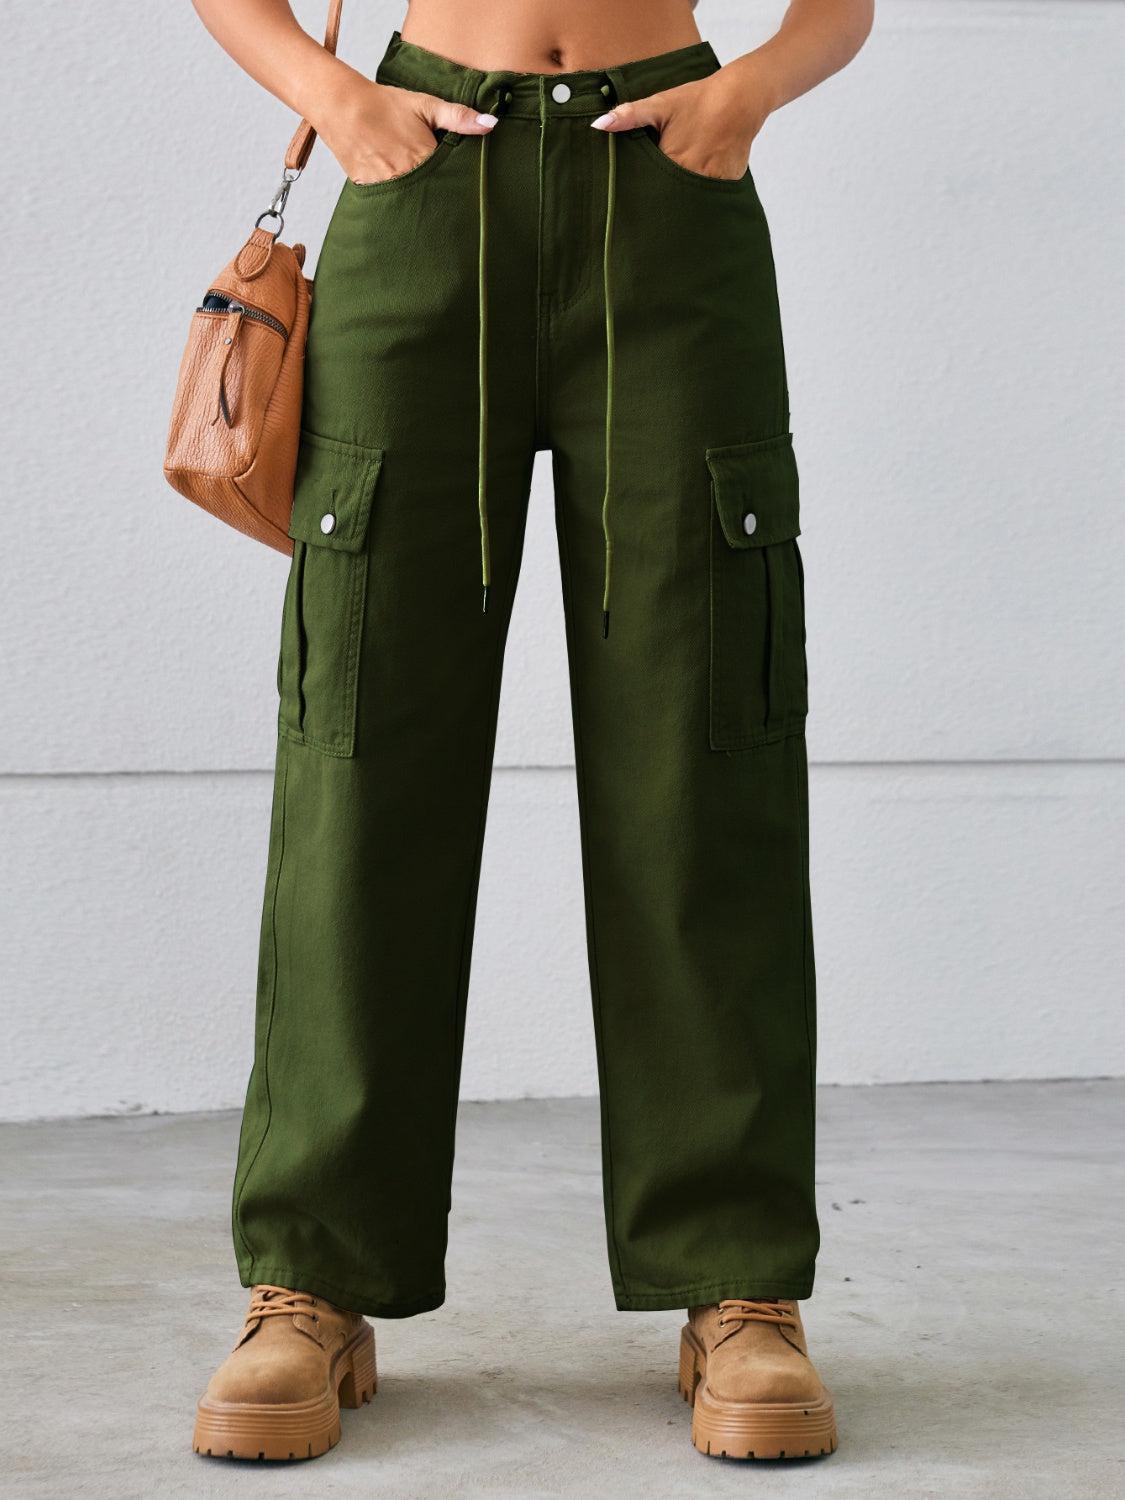 a woman wearing green pants and a crop top